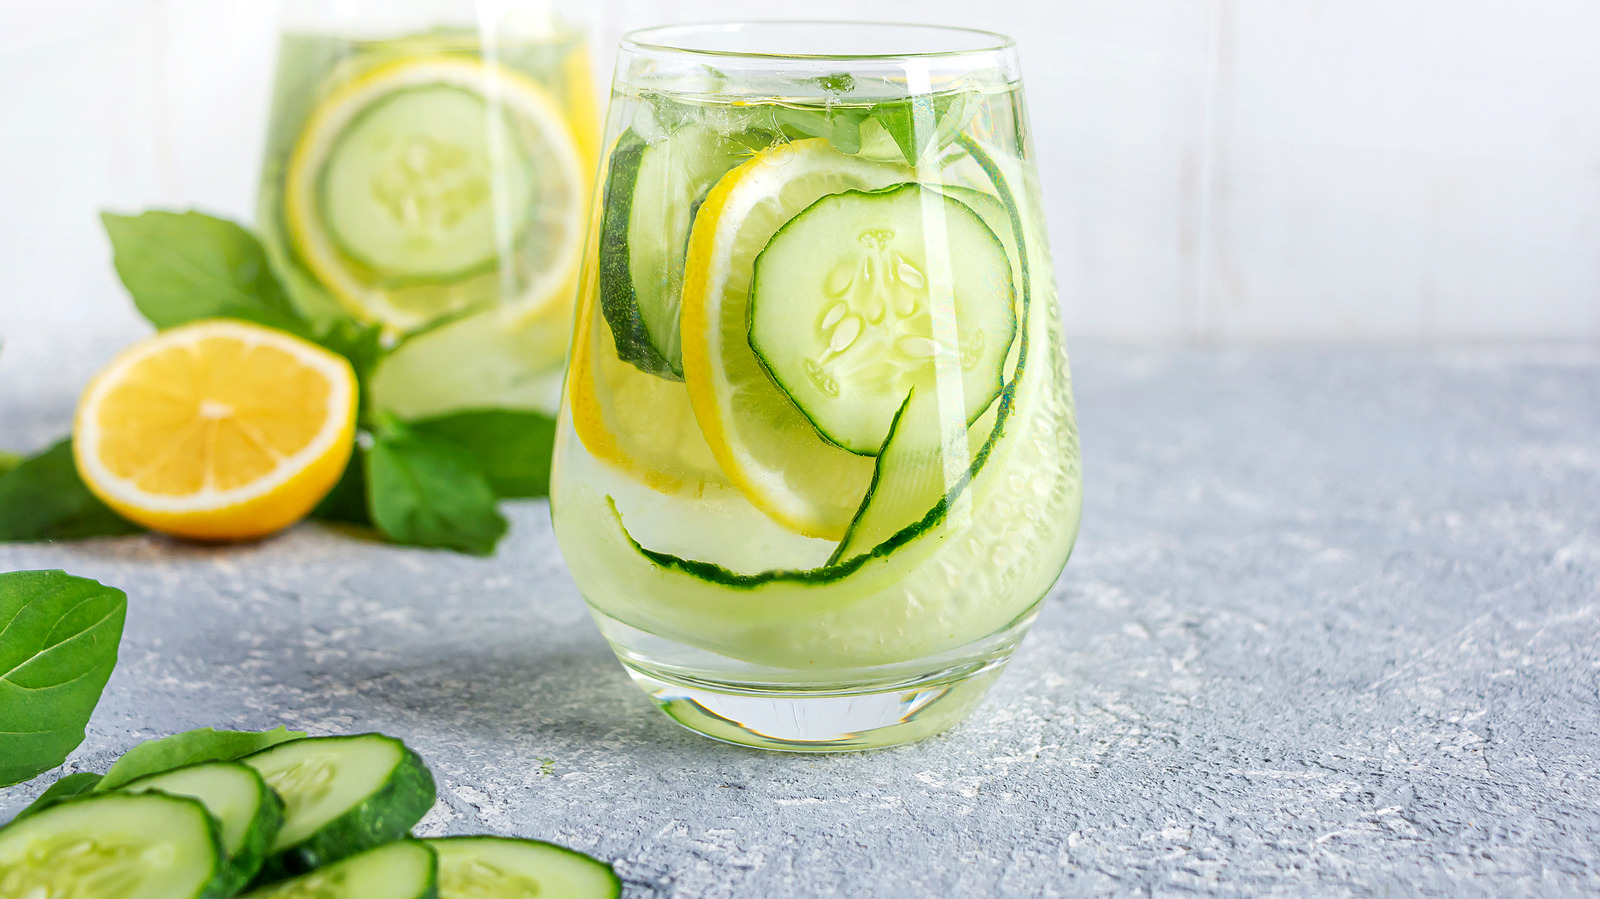 https://www.thedailymeal.com/img/gallery/the-easy-cutting-tip-you-need-to-infuse-cucumber-water-in-record-time/l-intro-1684427893.jpg